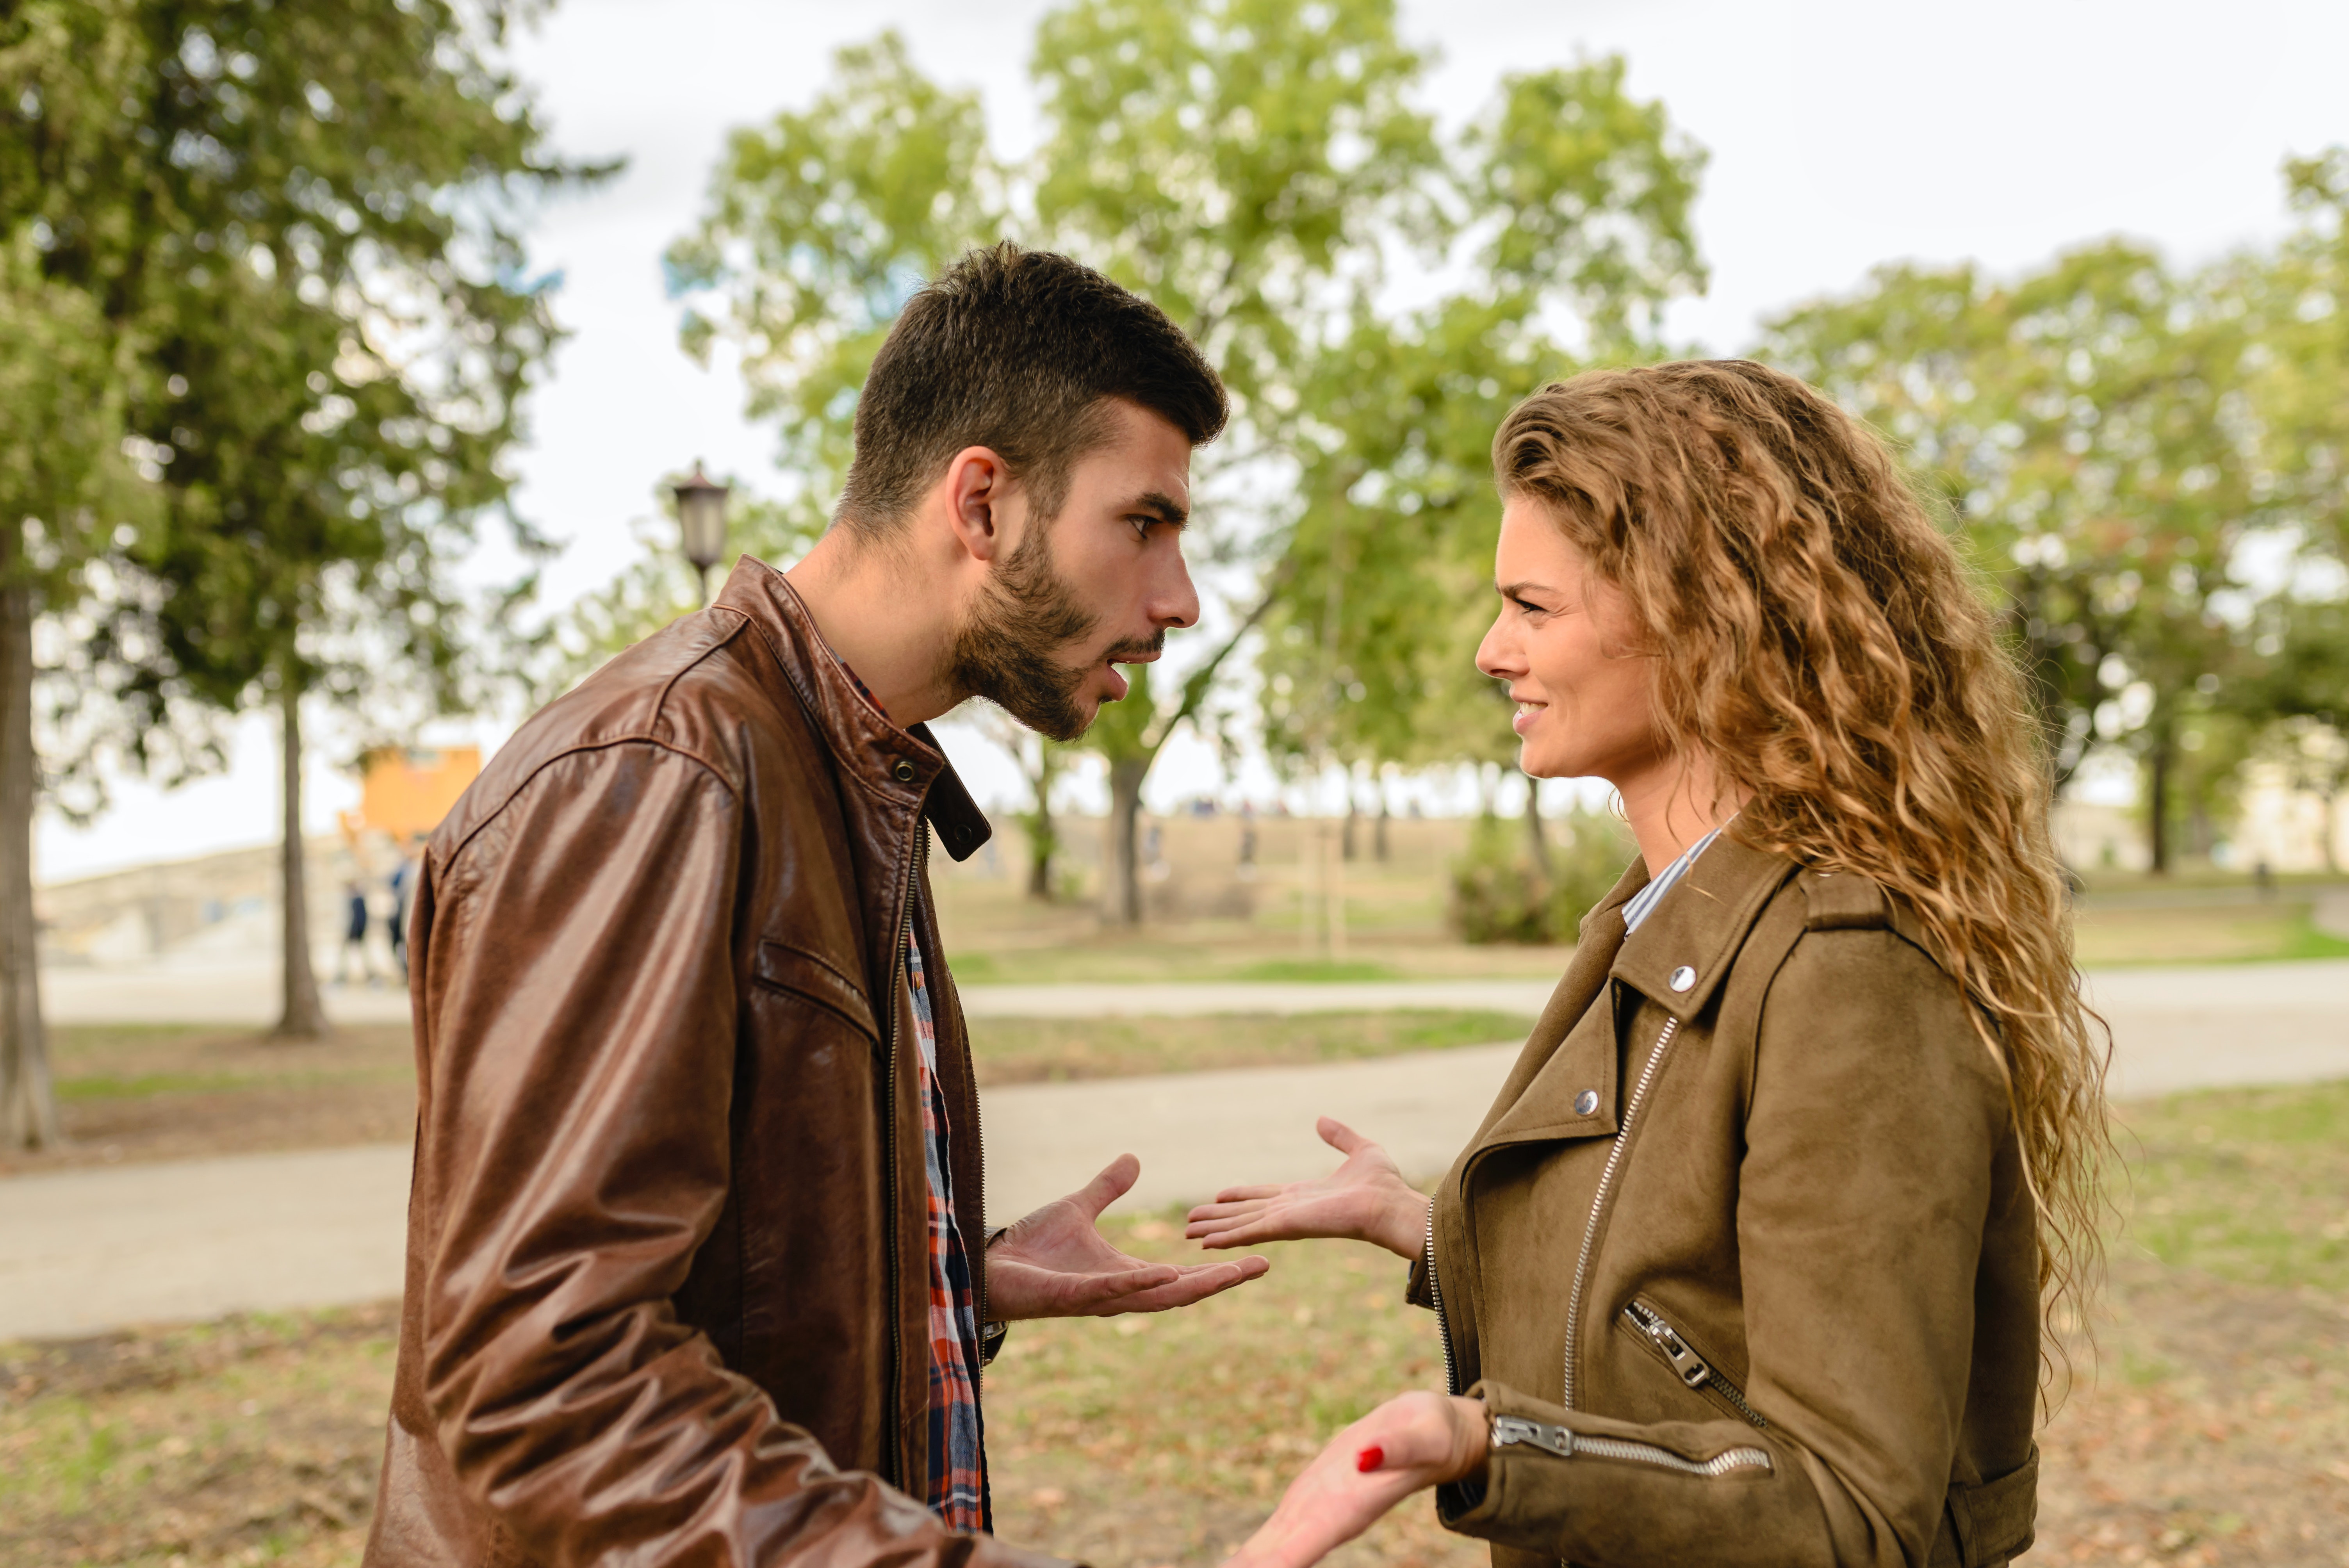 Man And Woman Wearing Brown Leather Jackets. | Source: Pexels